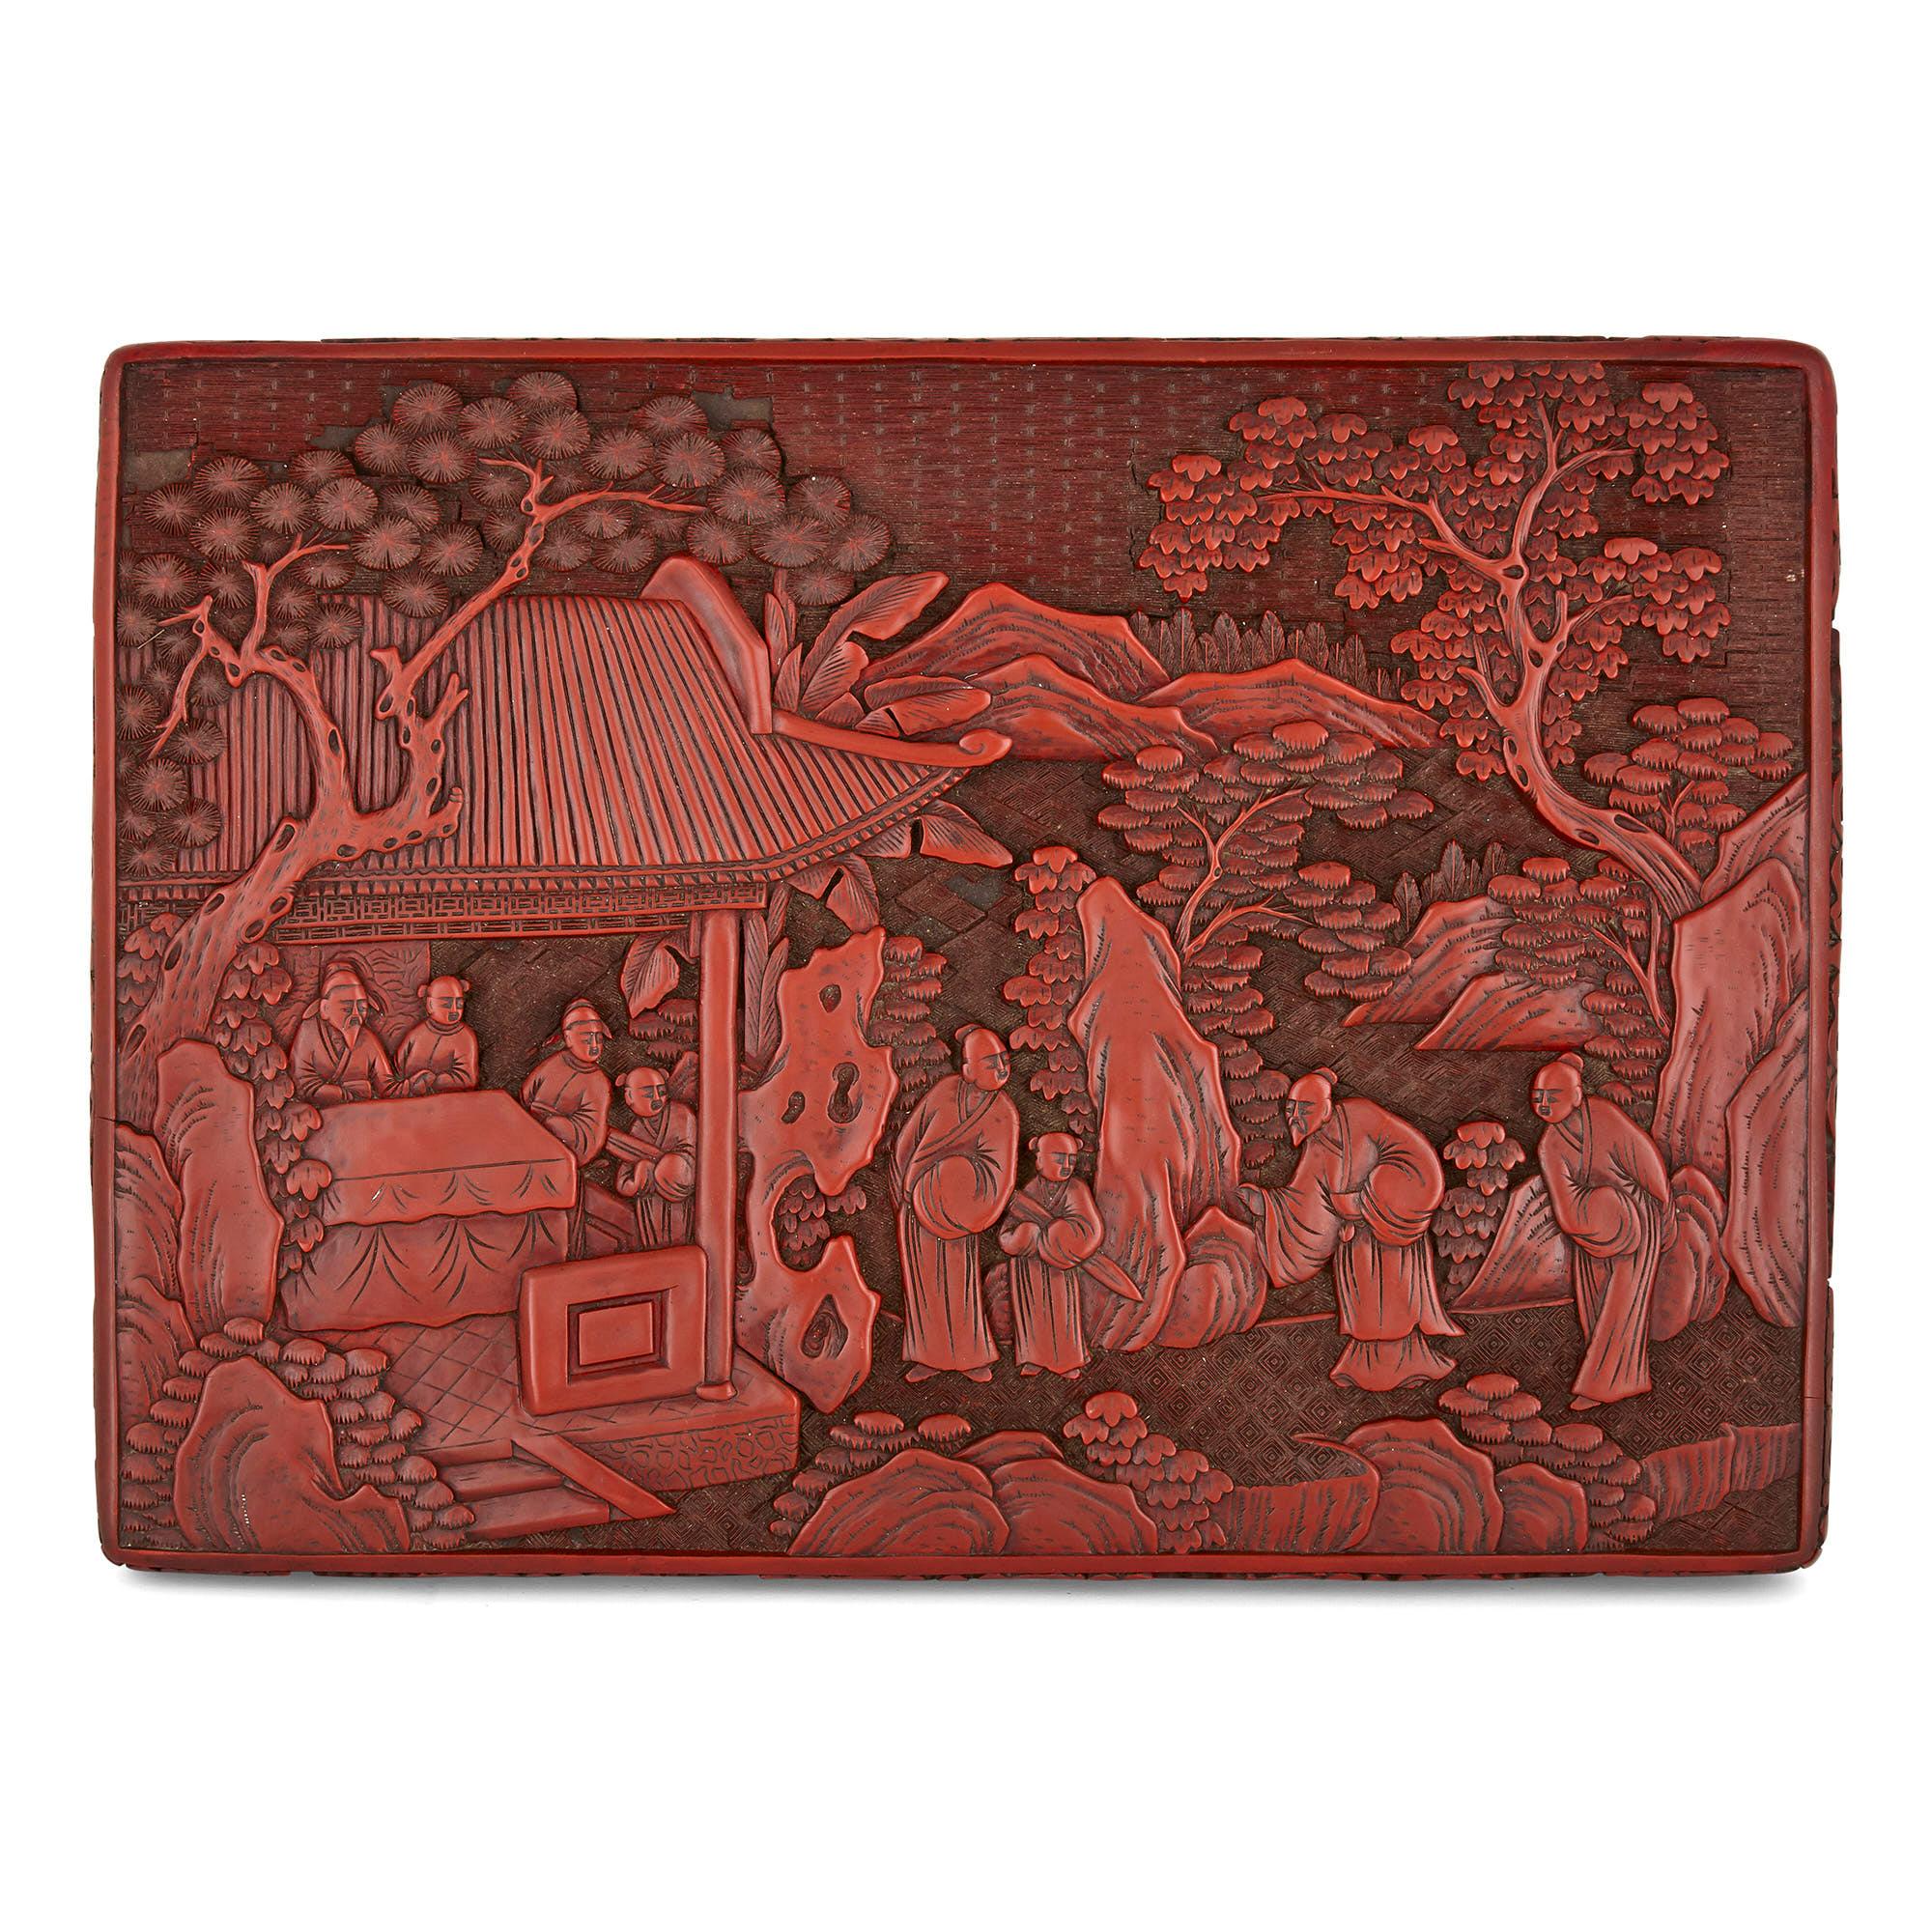 Antique Chinese Lacquer Gaming Box and Counters
Chinese, late 19th century
Height 9.5cm, width 32cm, depth 23cm

This beautiful Chinese red lacquer box, the surfaces carved with traditional Chinese scenes in fine relief, contains three tiers, each